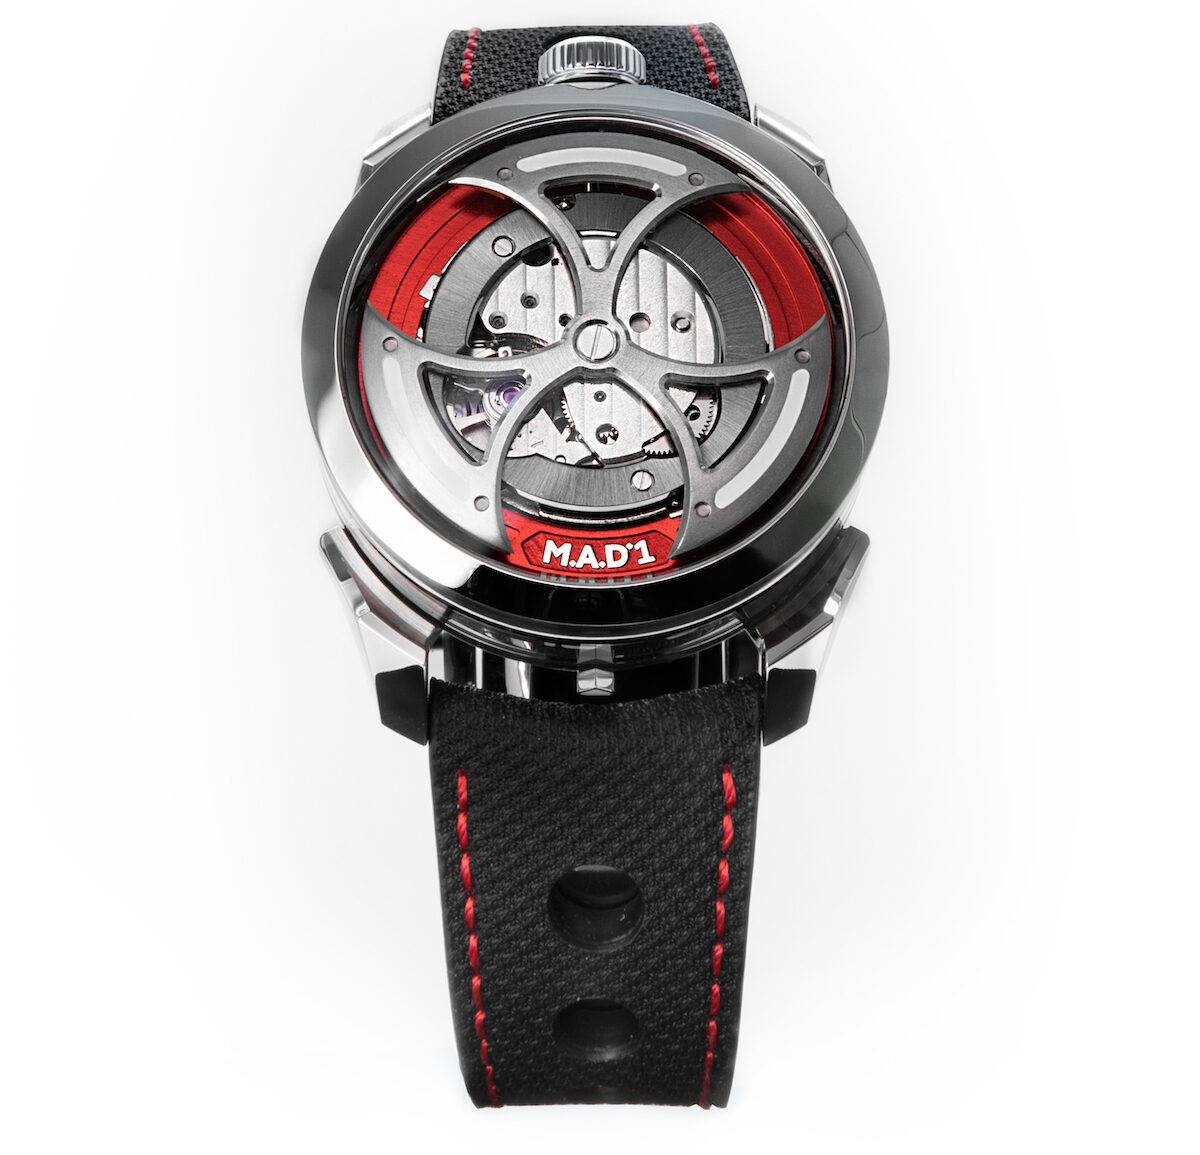 M.A.D Editions M.A.D 1 Red